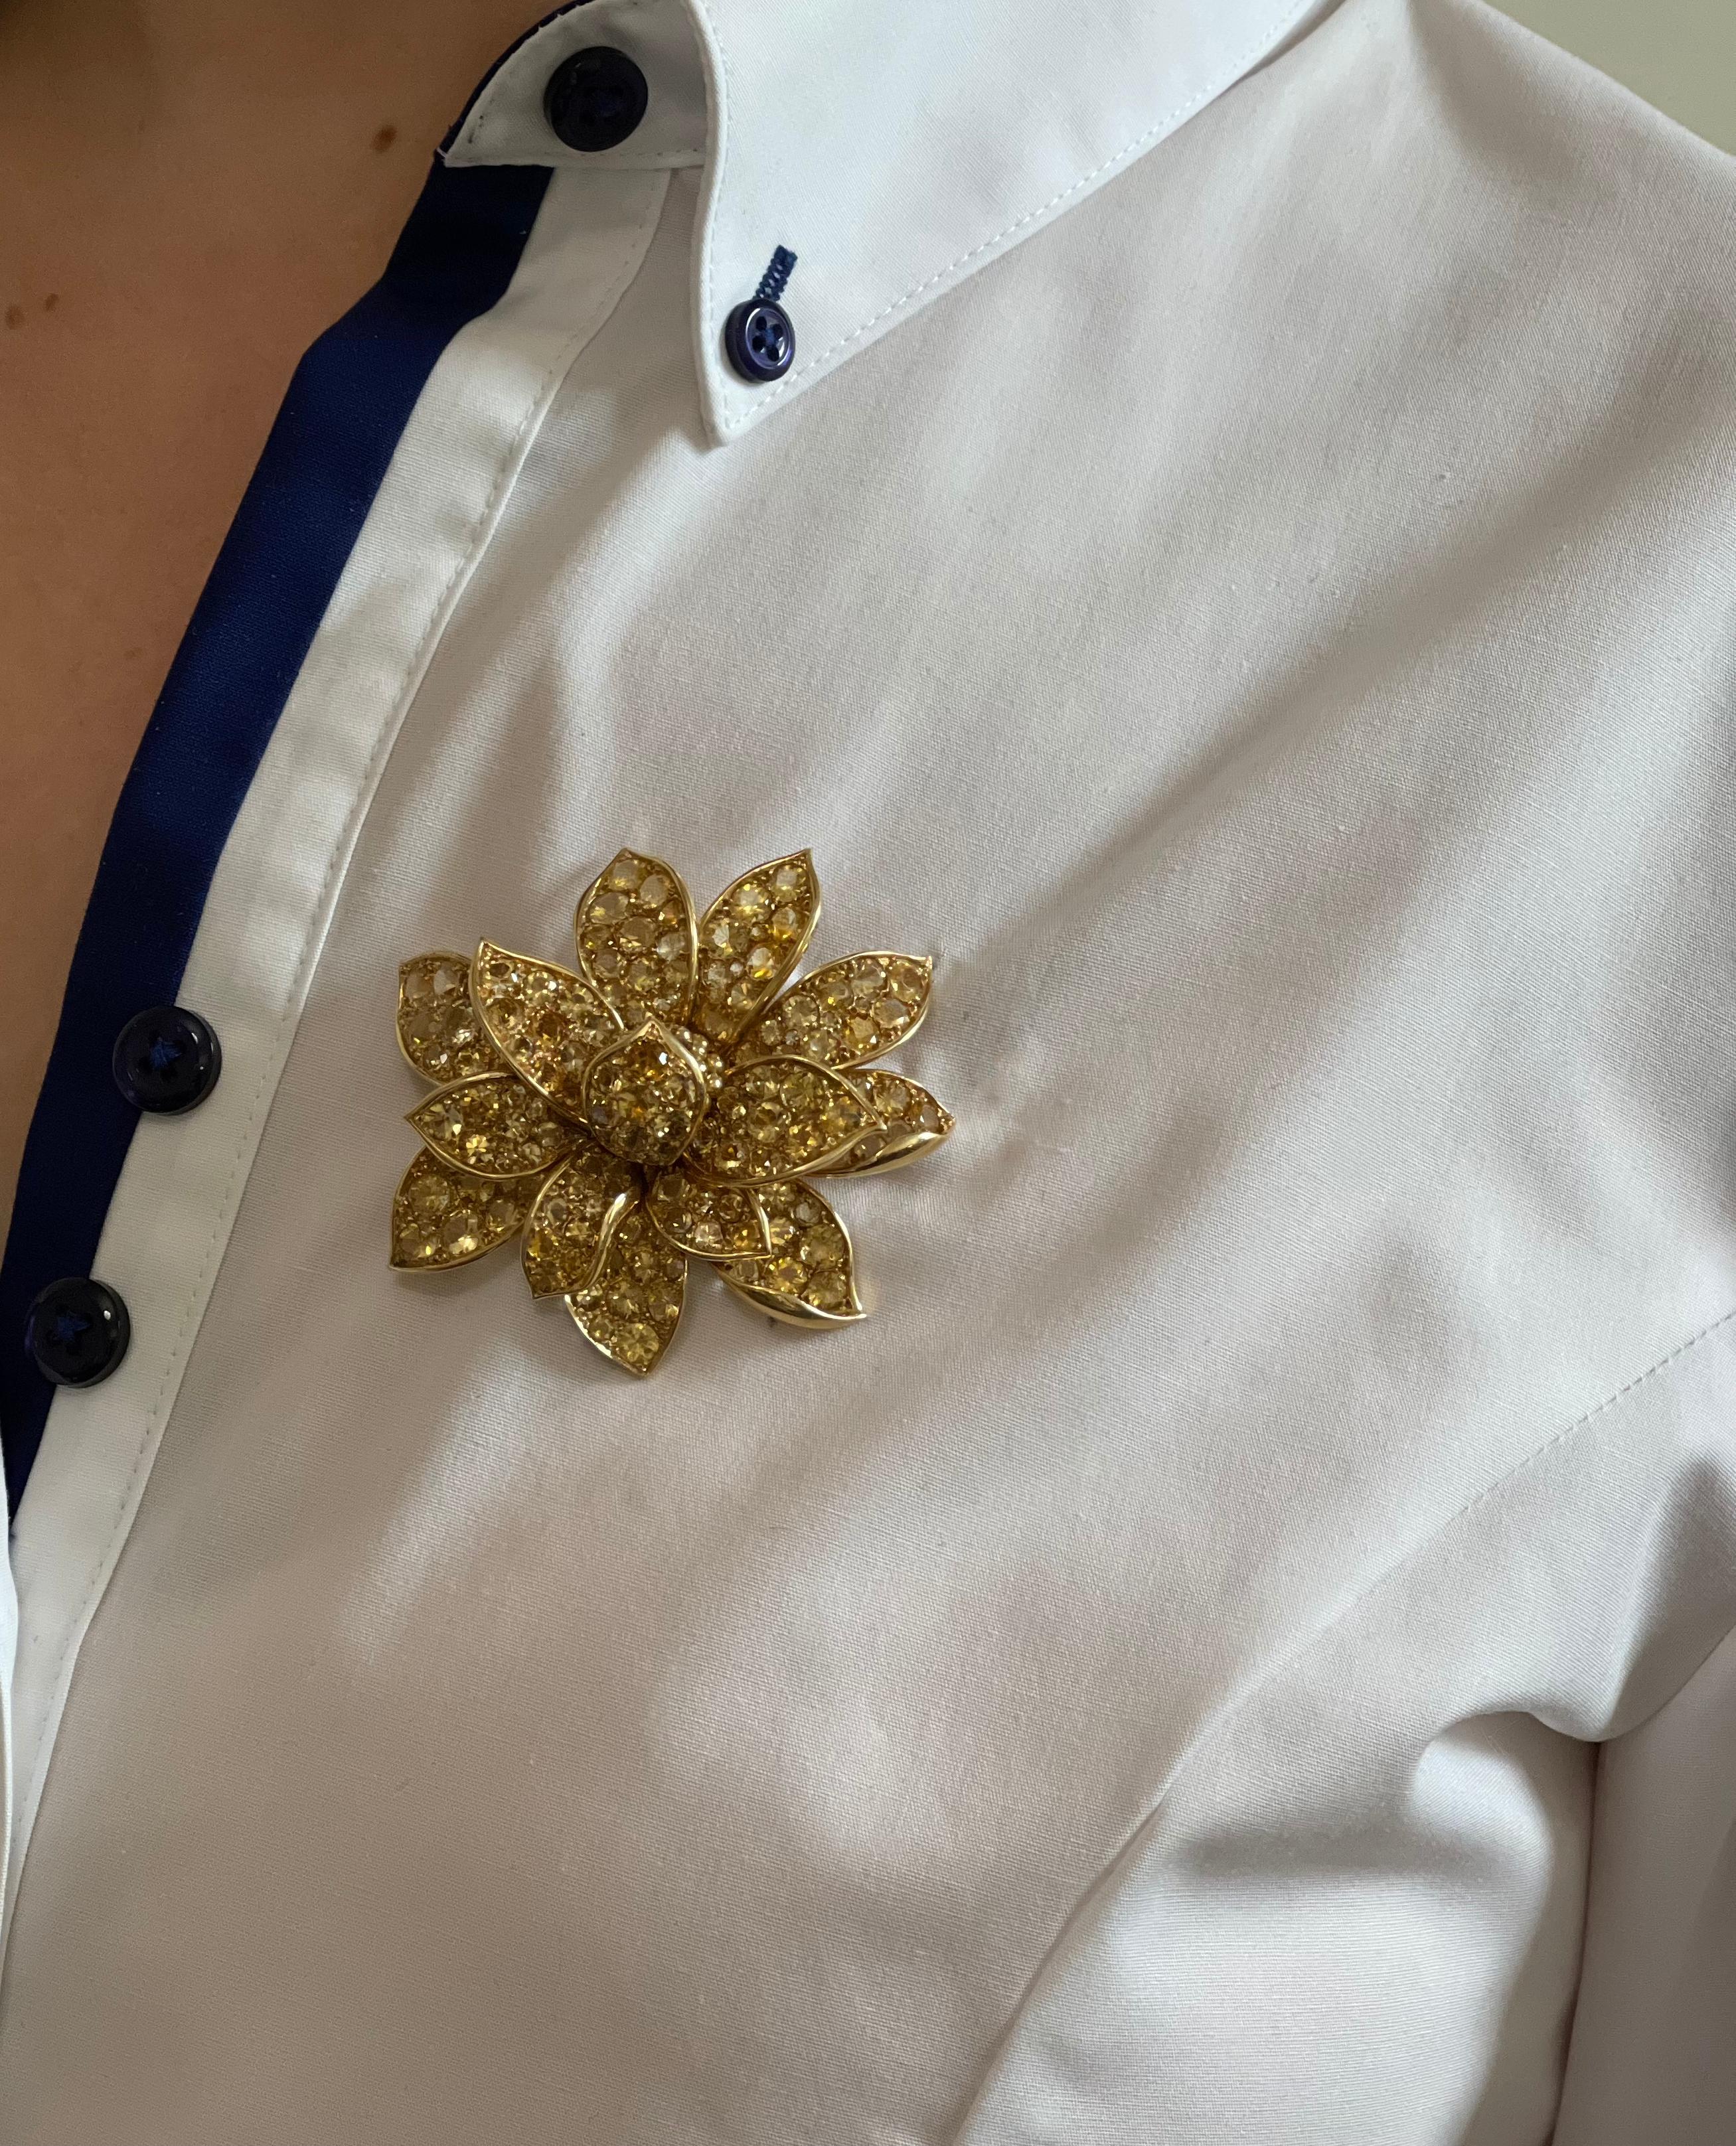 Large 18k yellow gold flower brooch, with round cut vivid yellow sapphires. Brooch possibly made by Rene Boivin, bears punchmarks on the stem. Brooch measures 2.25